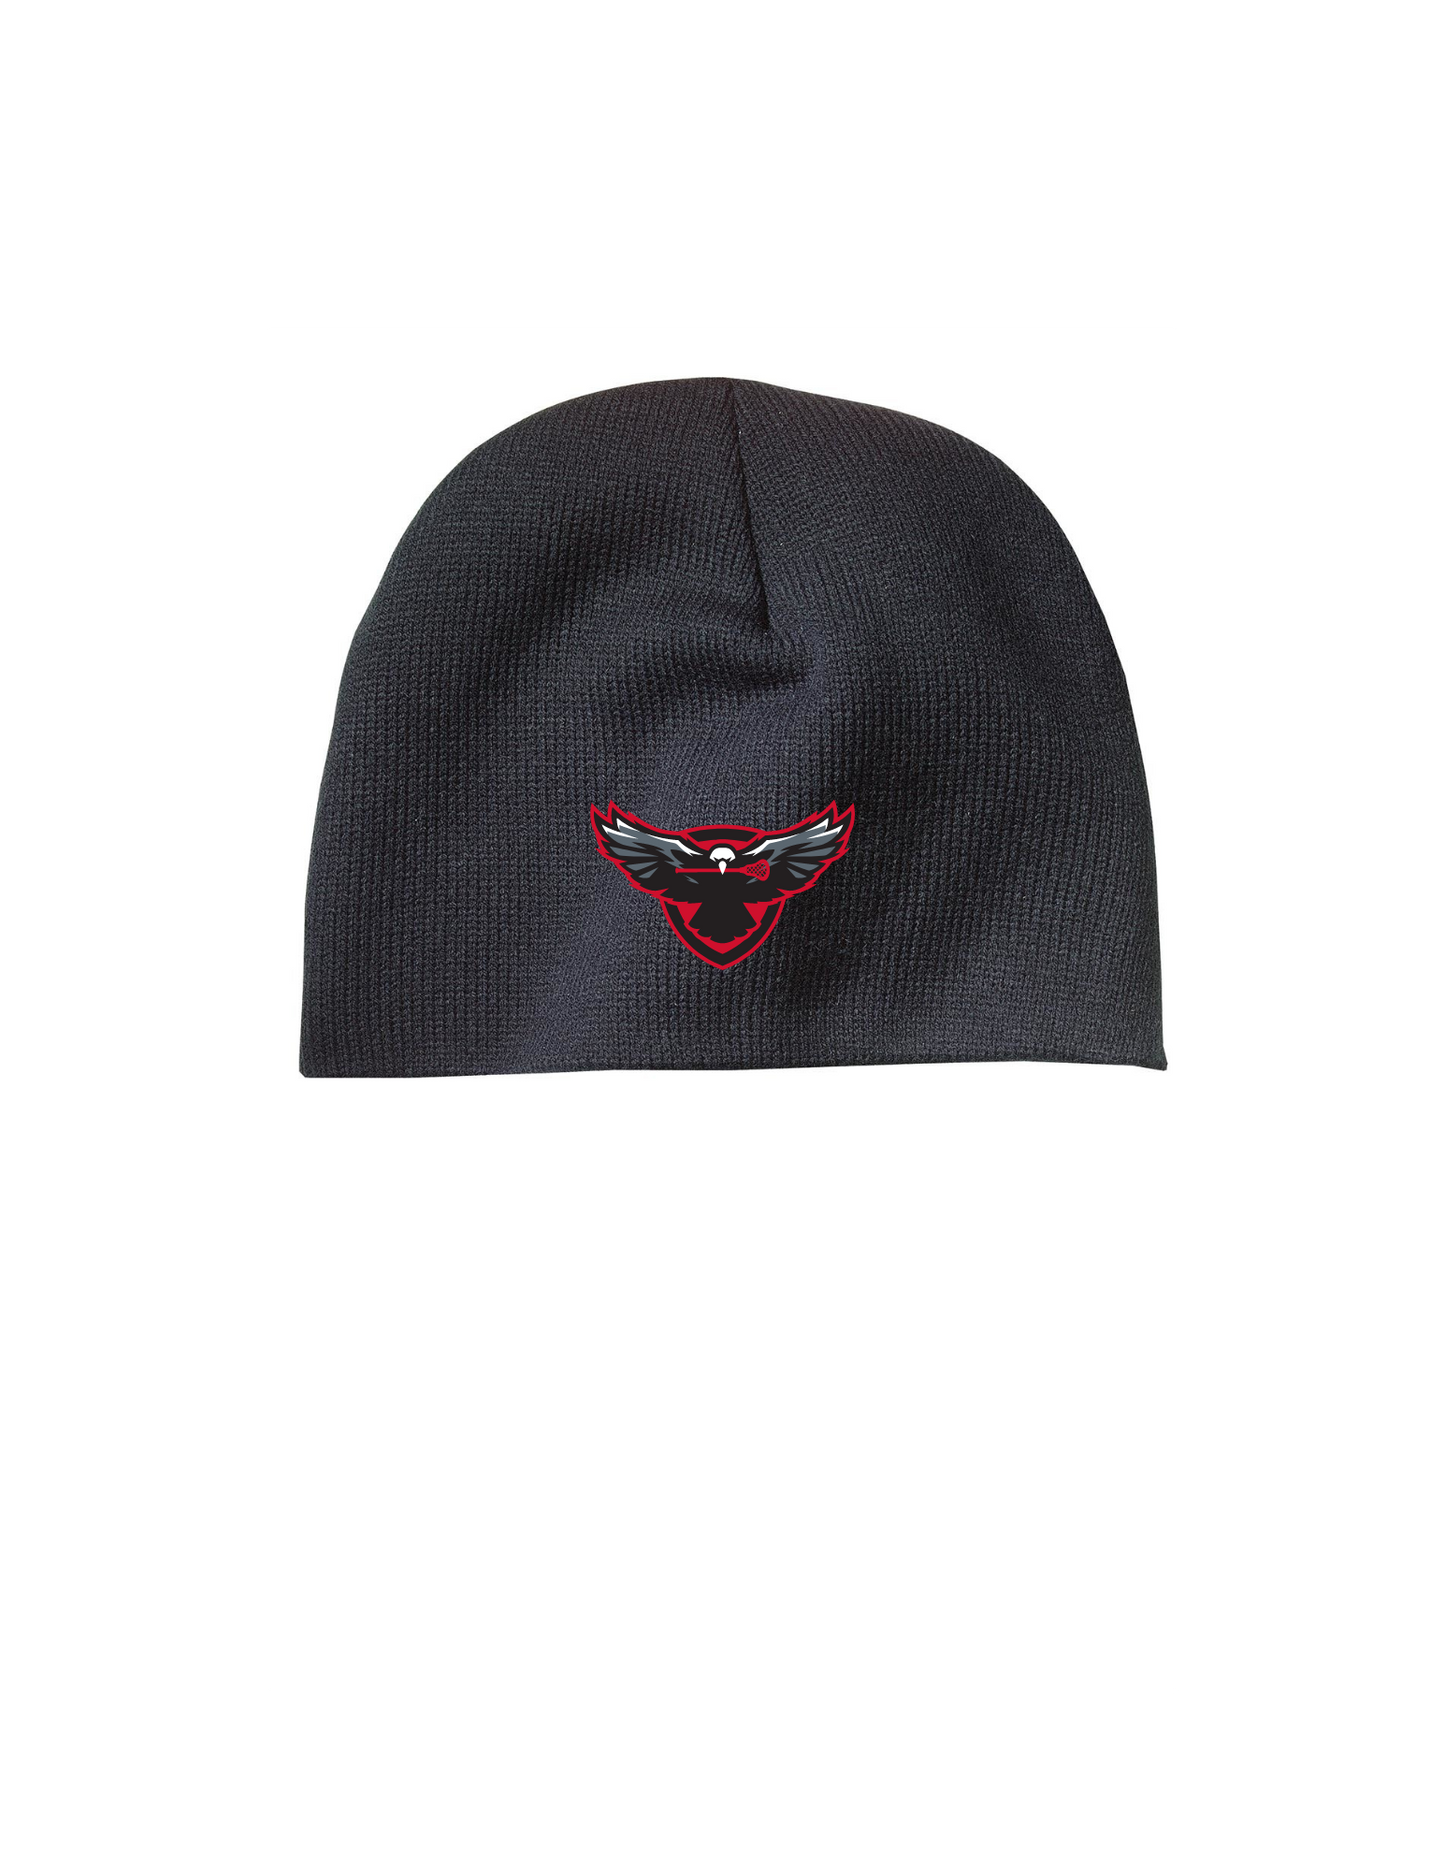 North Tapps Lacrosse Beanie Cap